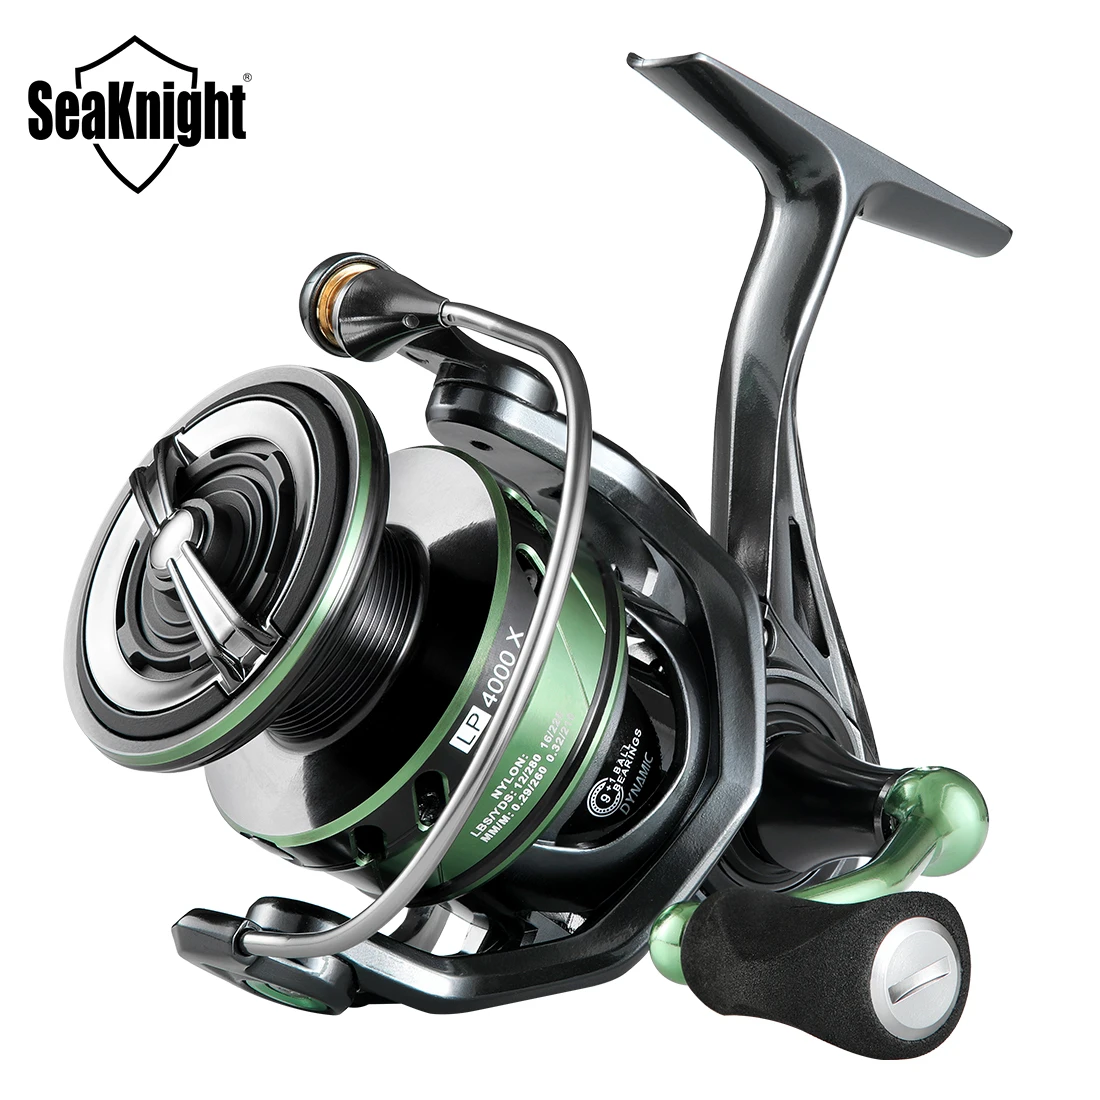 SeaKnight Brand WR3/WR3X Series 5.2:1 Spinning Fishing Reel 28lbs Carbon Fiber Drag System Spinning Wheel Fishing Coil 2000-5000